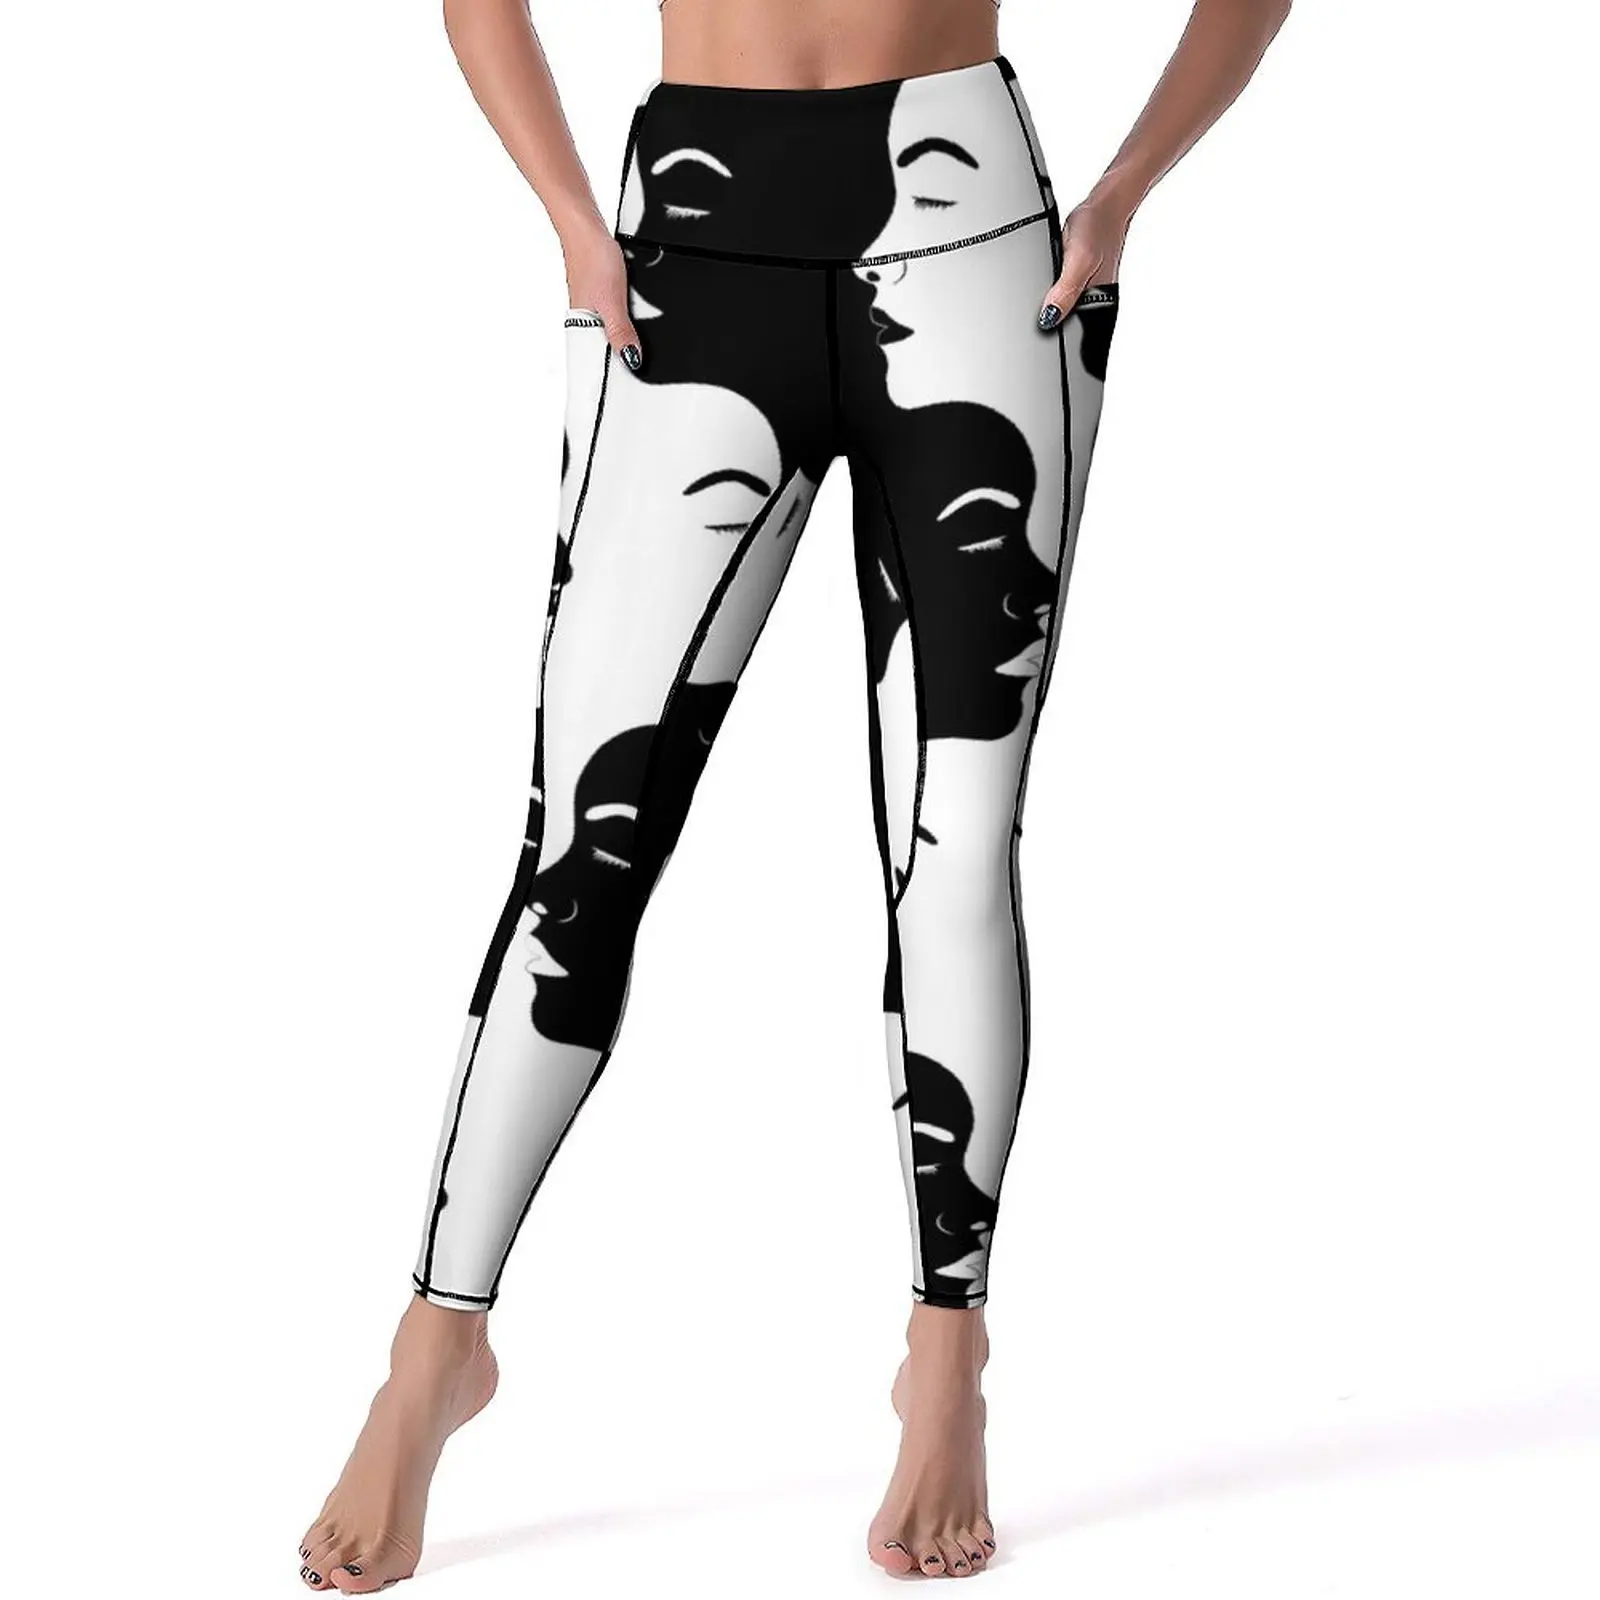 

White And Black Women Head Yoga Pants Abstract We Are All The Same Leggings Novelty Yoga Legging Graphic Fitness Sport Pants